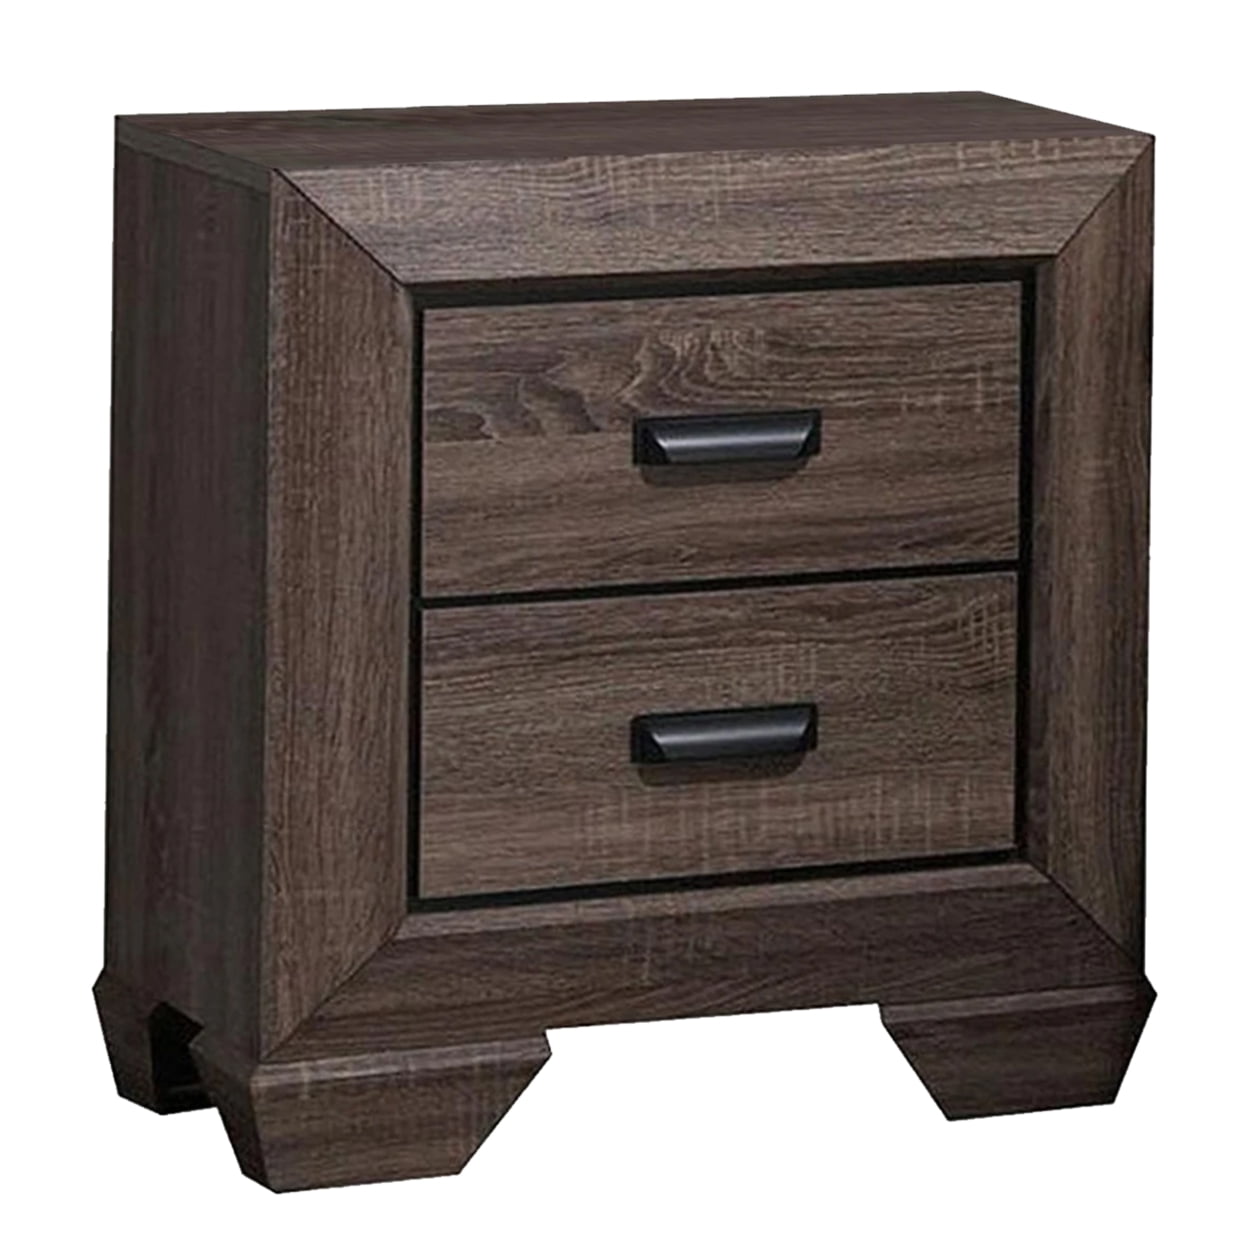 Picture of ACME 26023 Lyndon Nightstand, Weathered Gray Grain - 27 x 24 x 17 in.